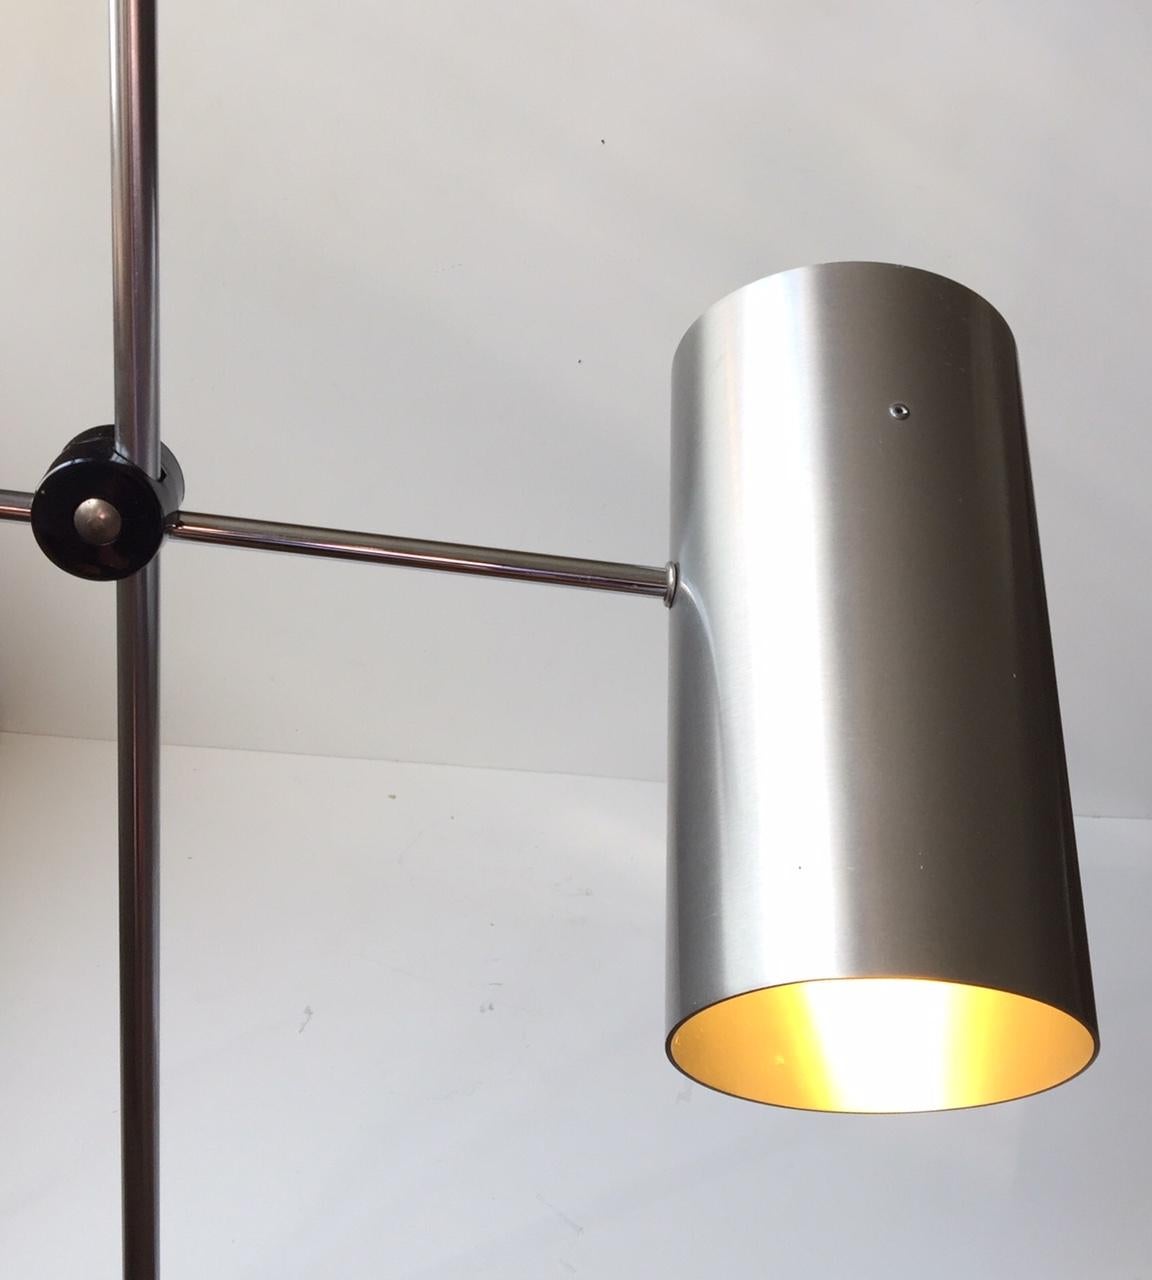 A 'President' floor lamp manufactured by Fog & Mørup in Denmark during the 1960s. It was originally designed by Jo/Johannes Hammerborg in 1966. But this configuration remains slightly different due to the Pipe/cylindrical shade in Brushed aluminium.